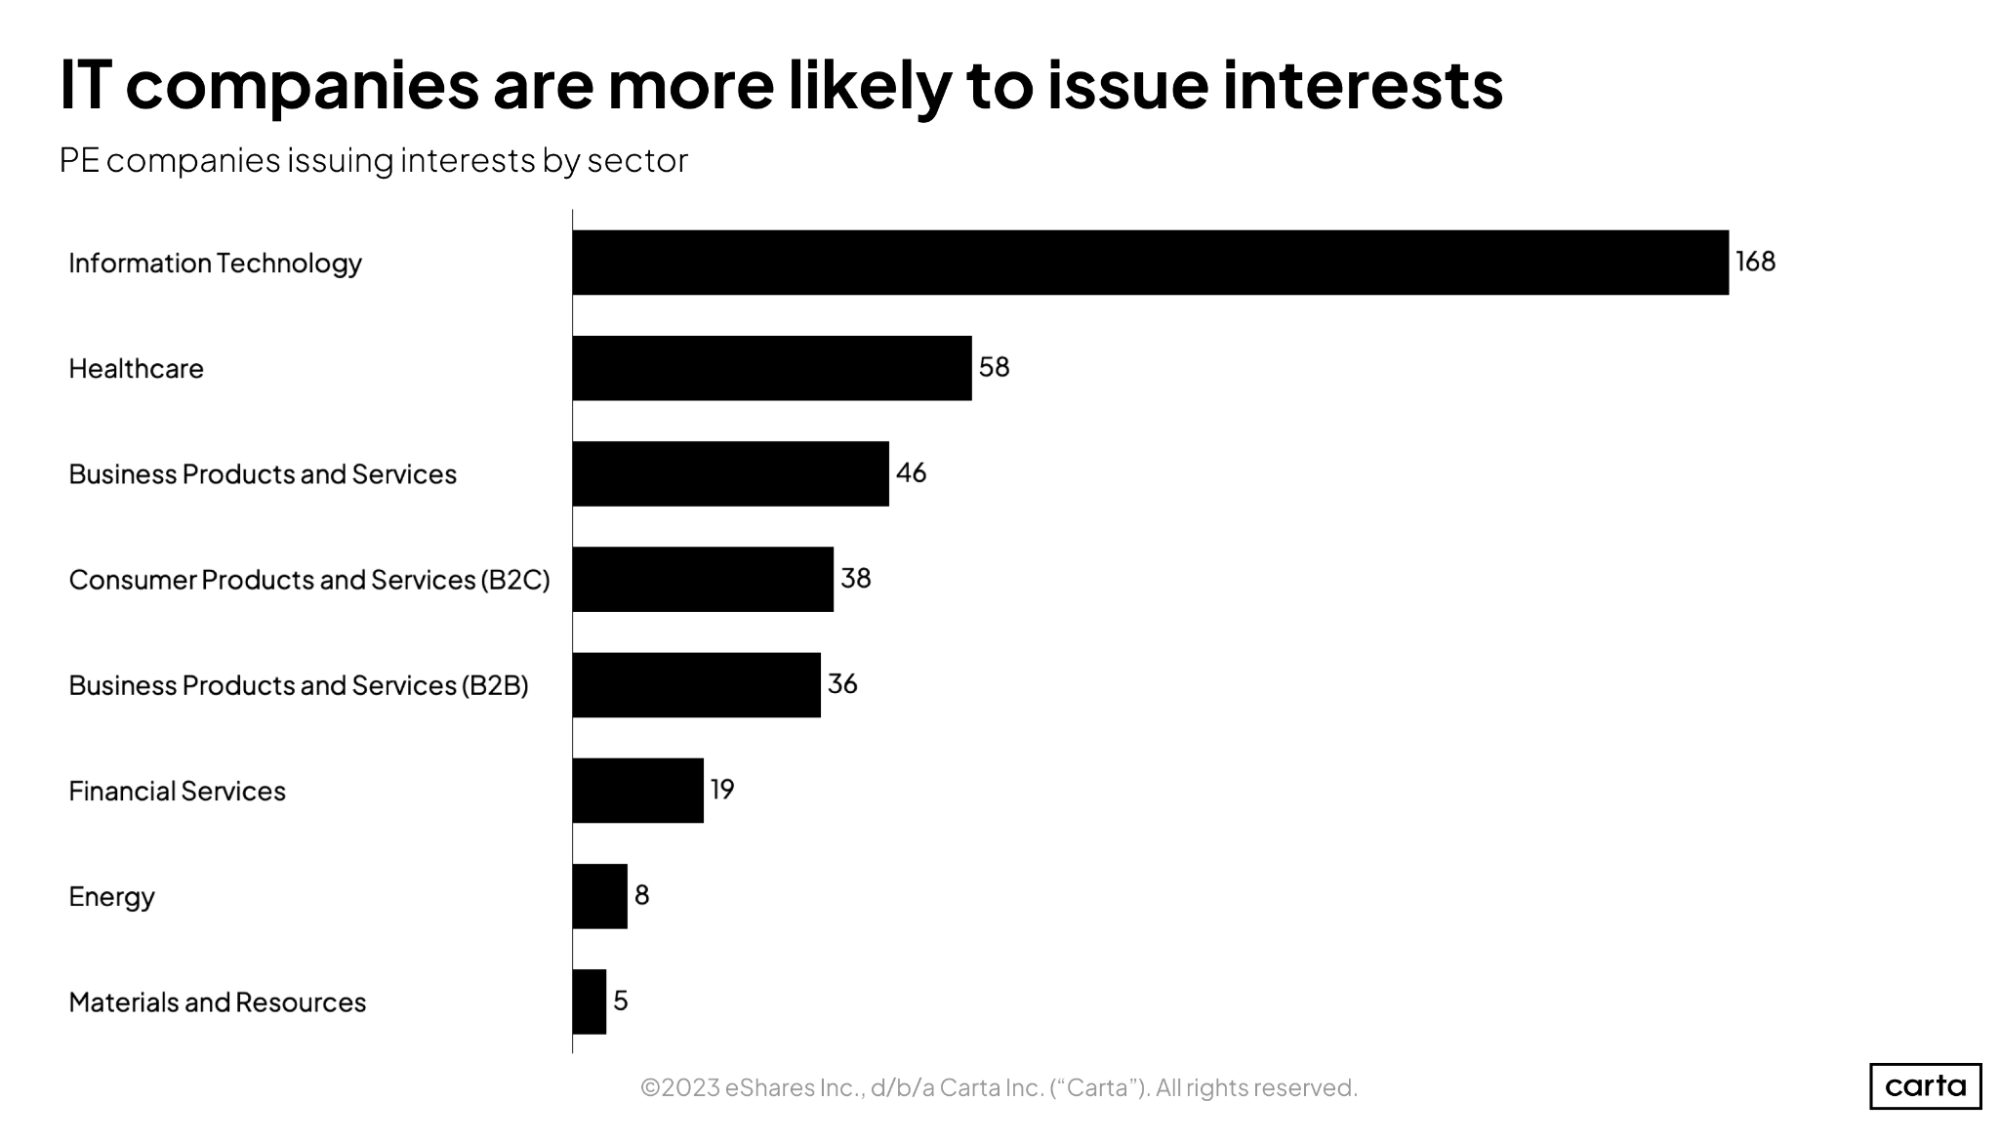 IT companies are more likely to issue interests